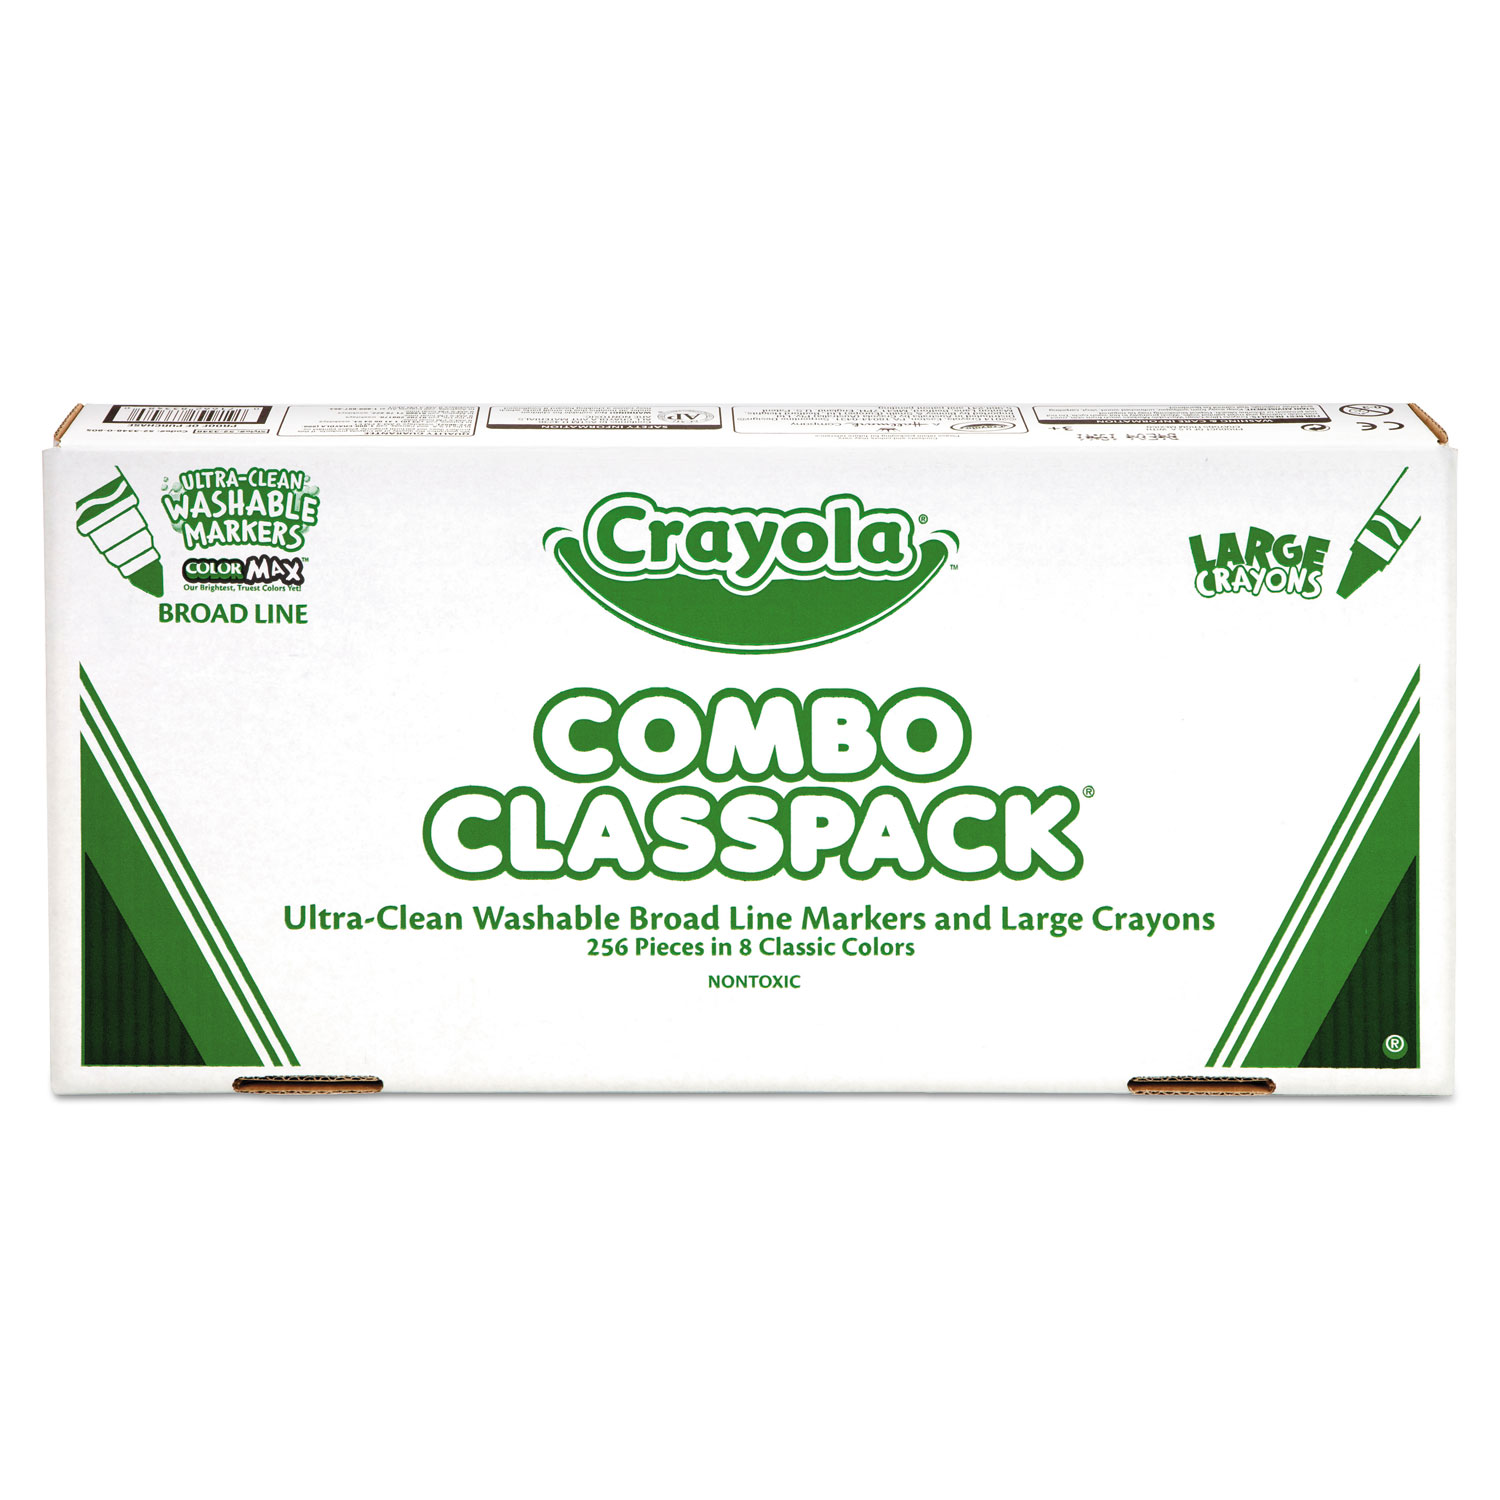 Crayola Markers, Washable, Classic Colors 8 markers